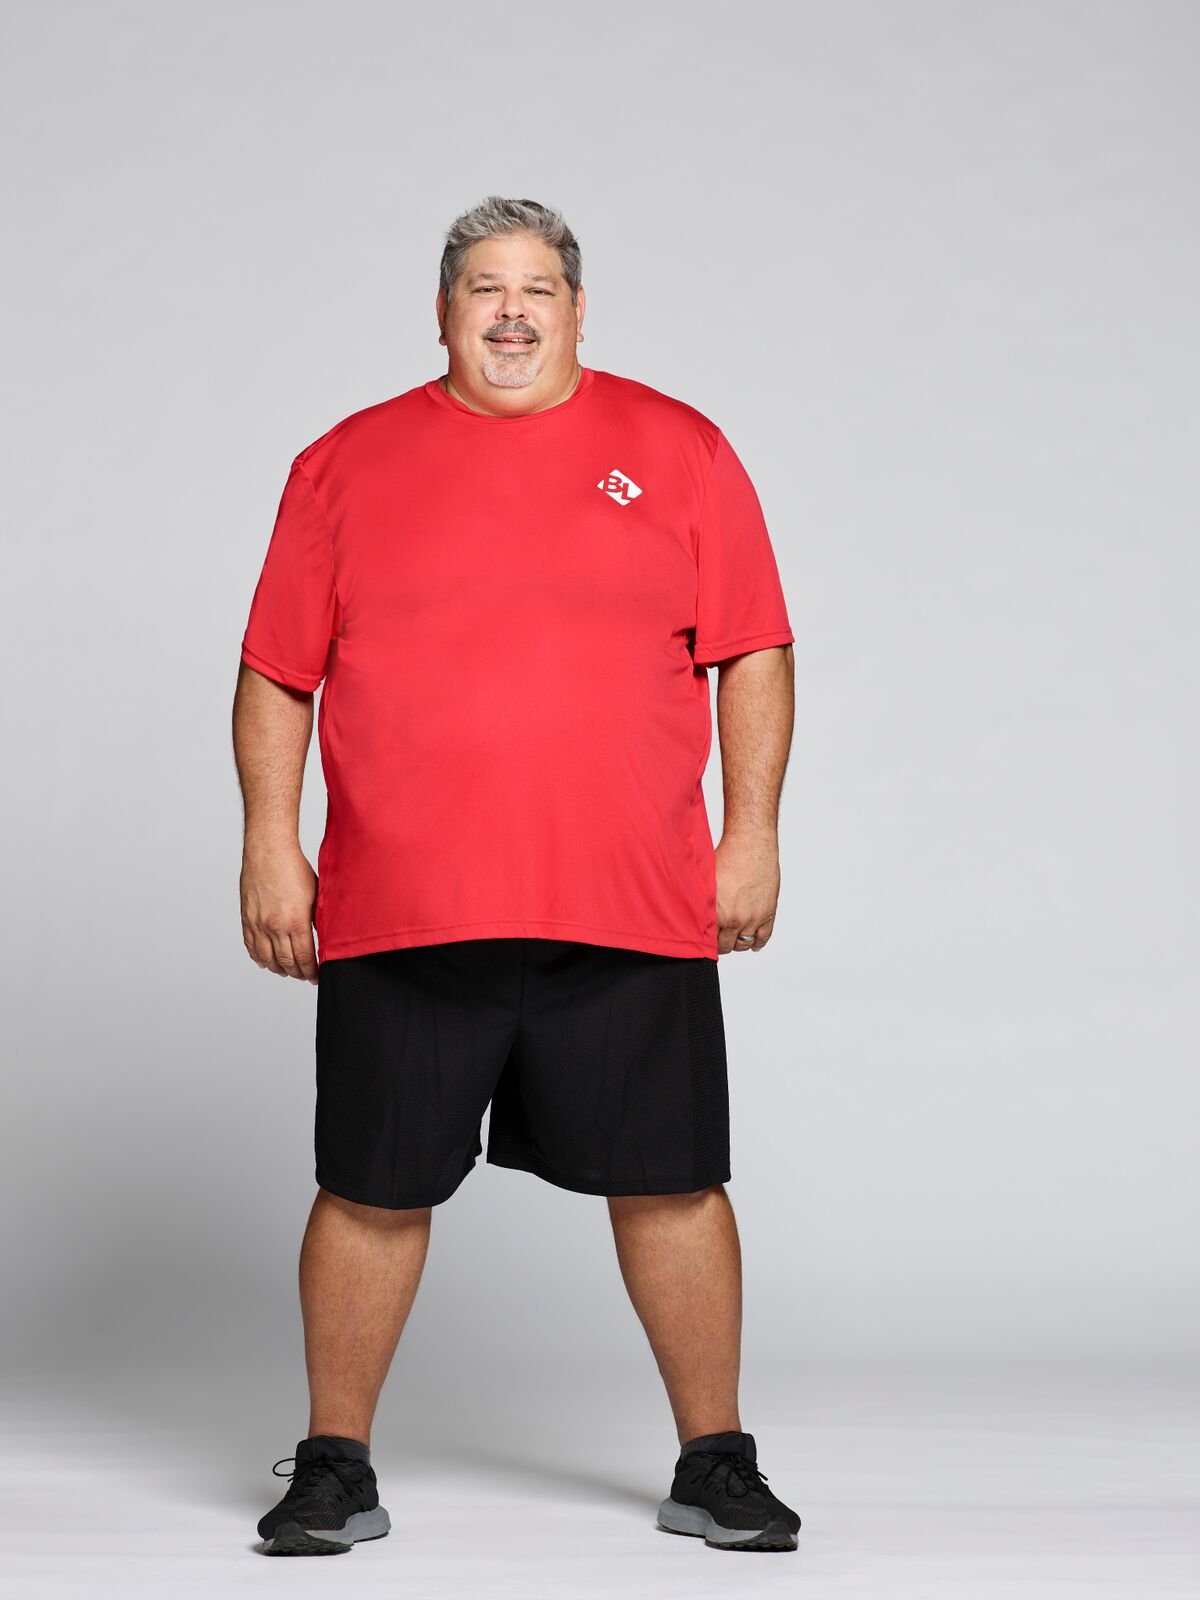 Jim DaBattista, the winner of "The Biggest Loser," before participating in the show. | Source: NBC